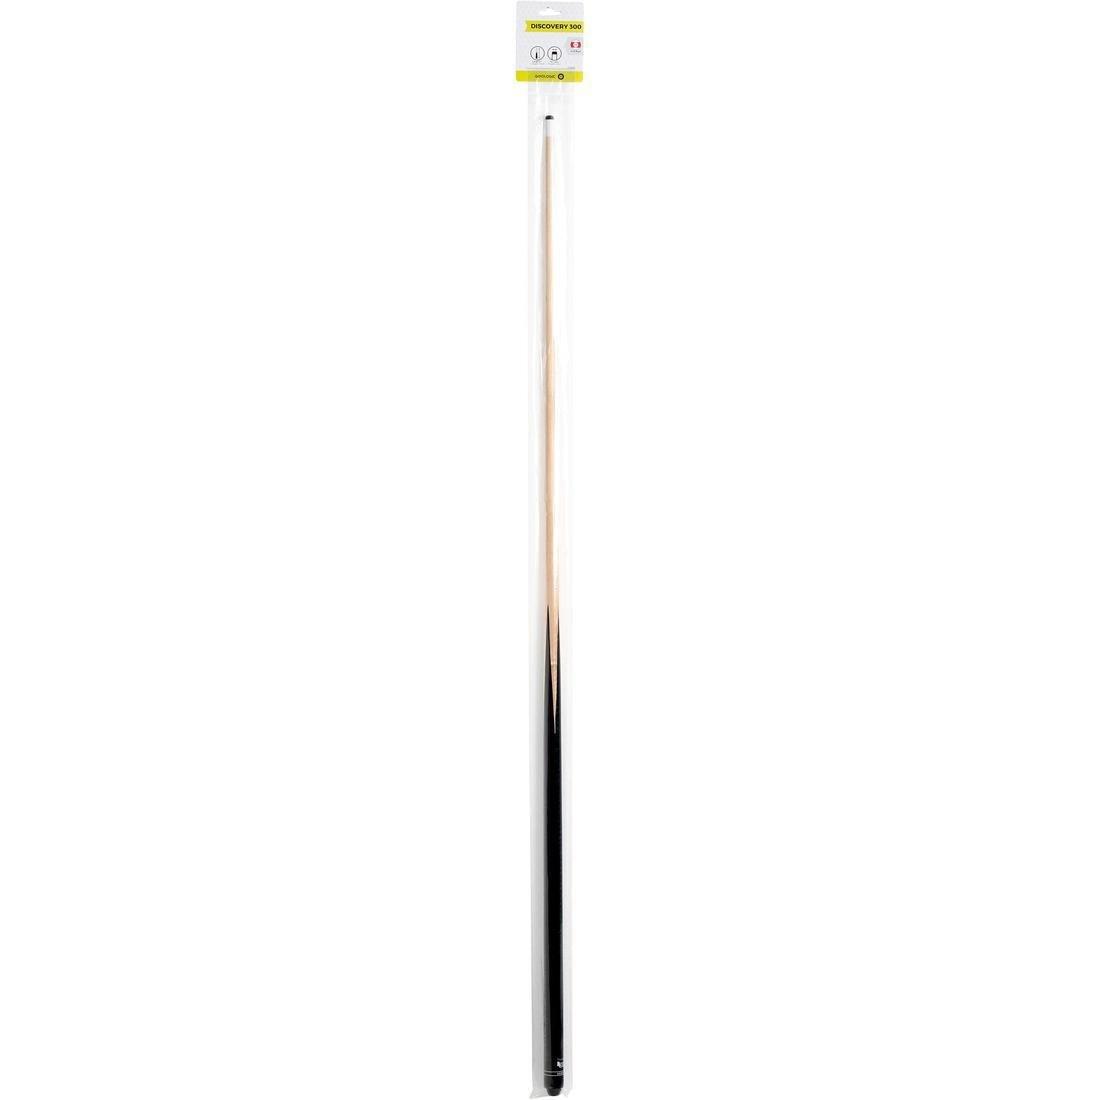 GEOLOGIC - Discovery 300 American Pool Cue, 1-Part - 145 cm (57)